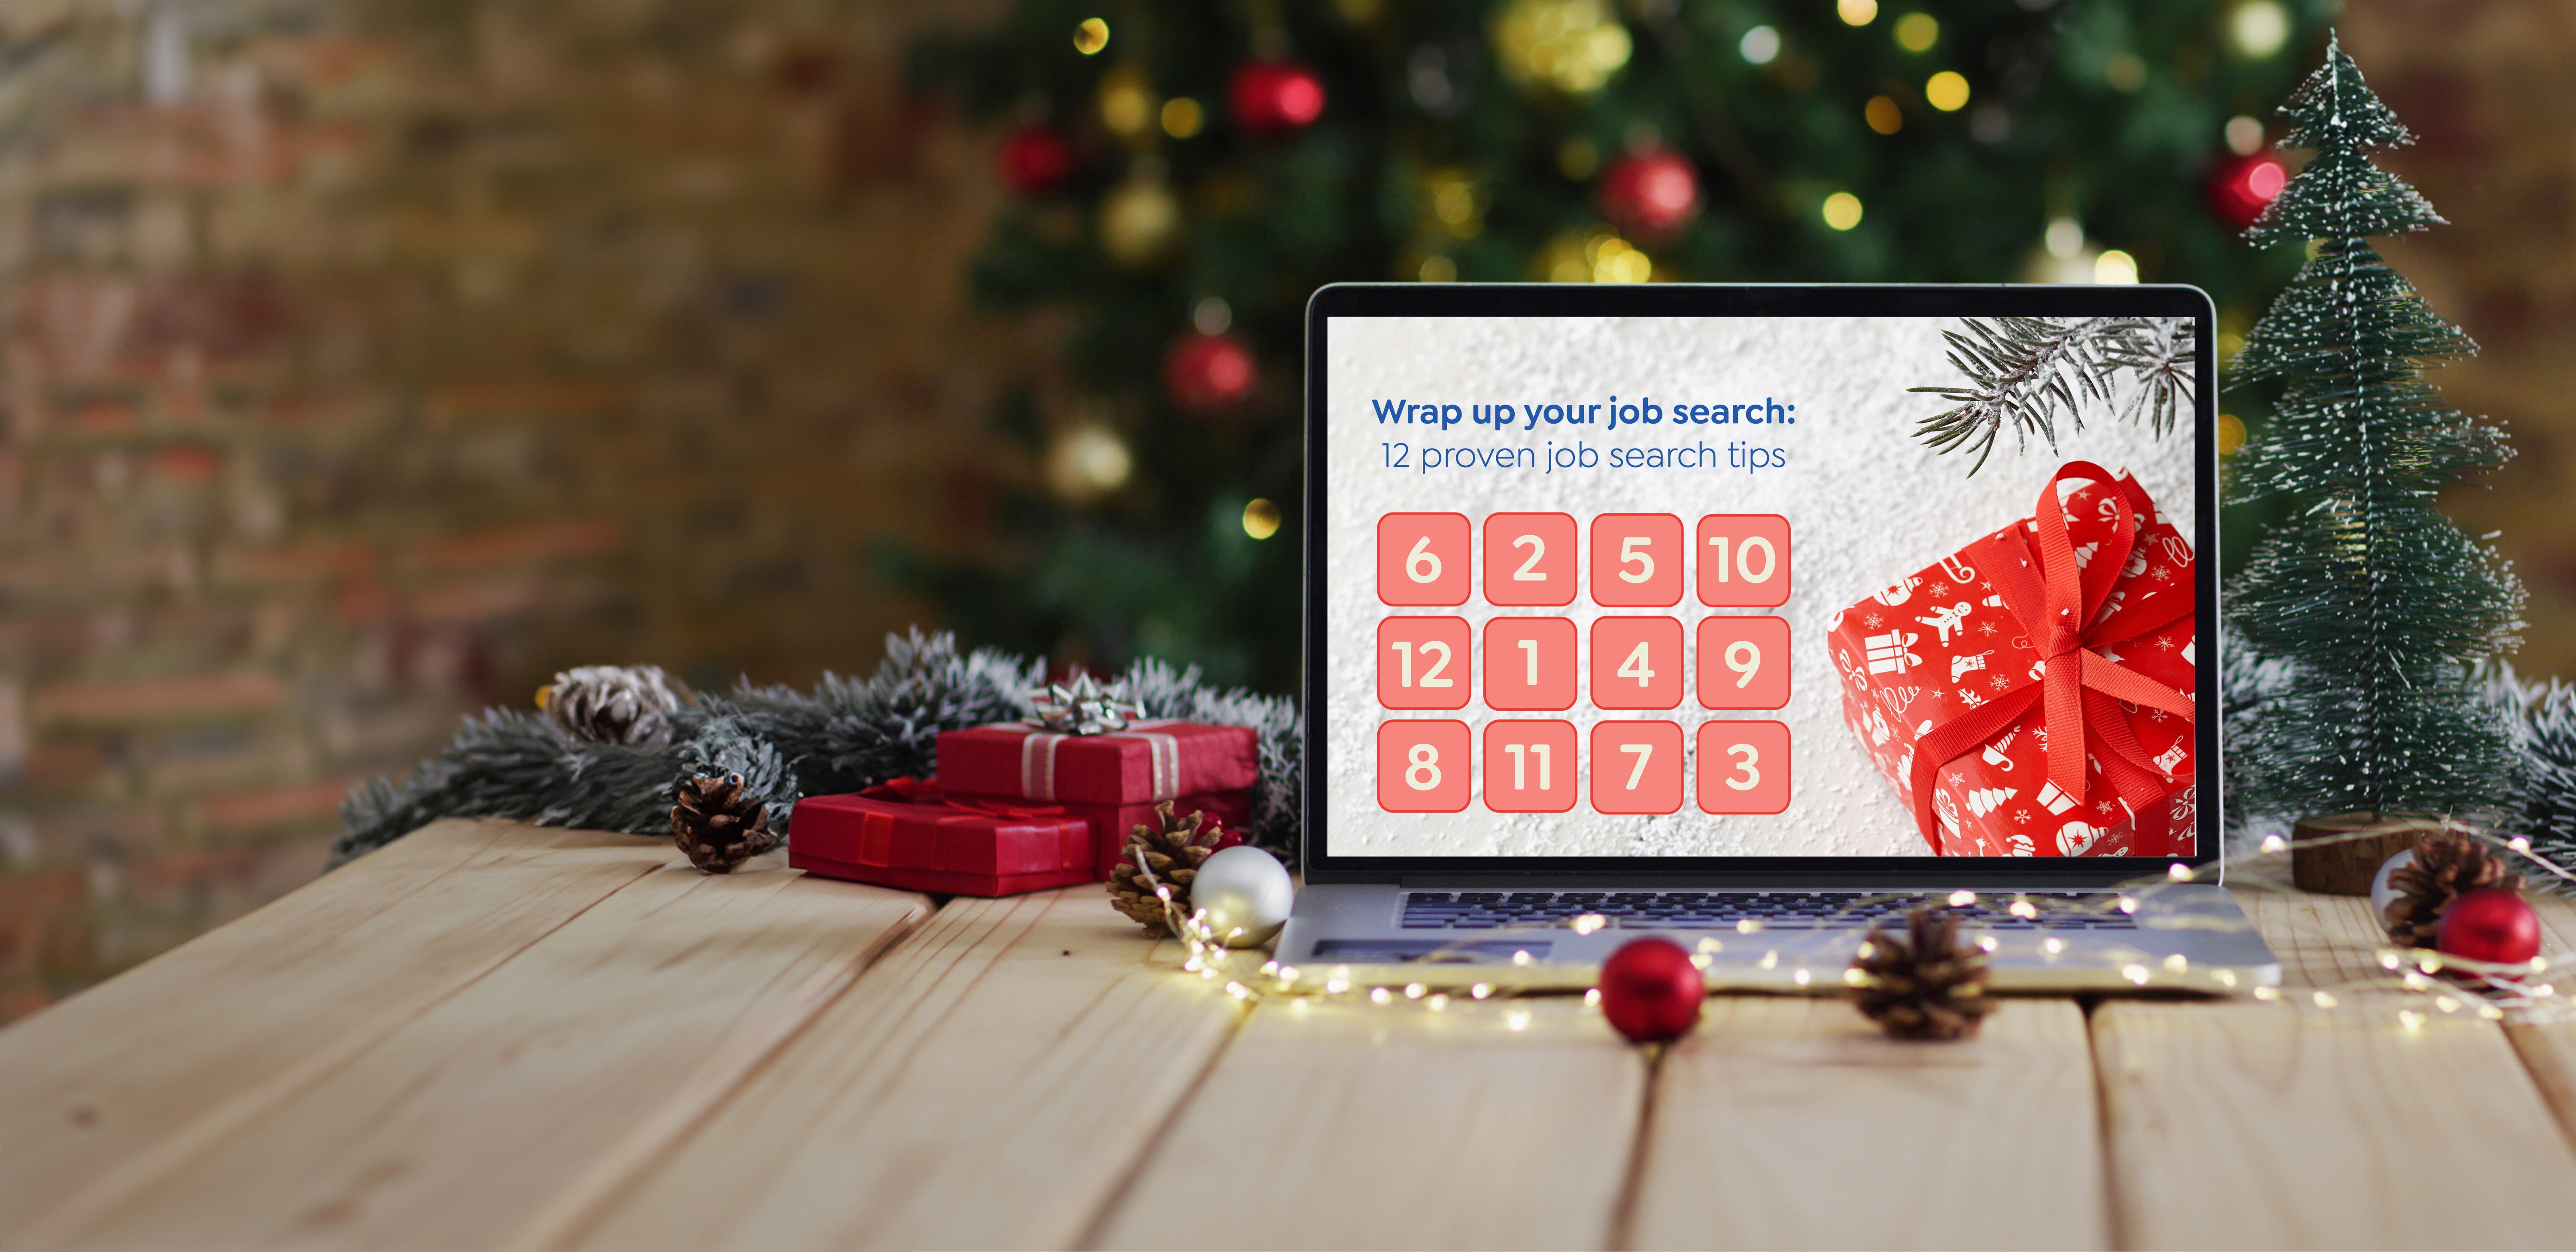 Wrap up your job search with our free gift